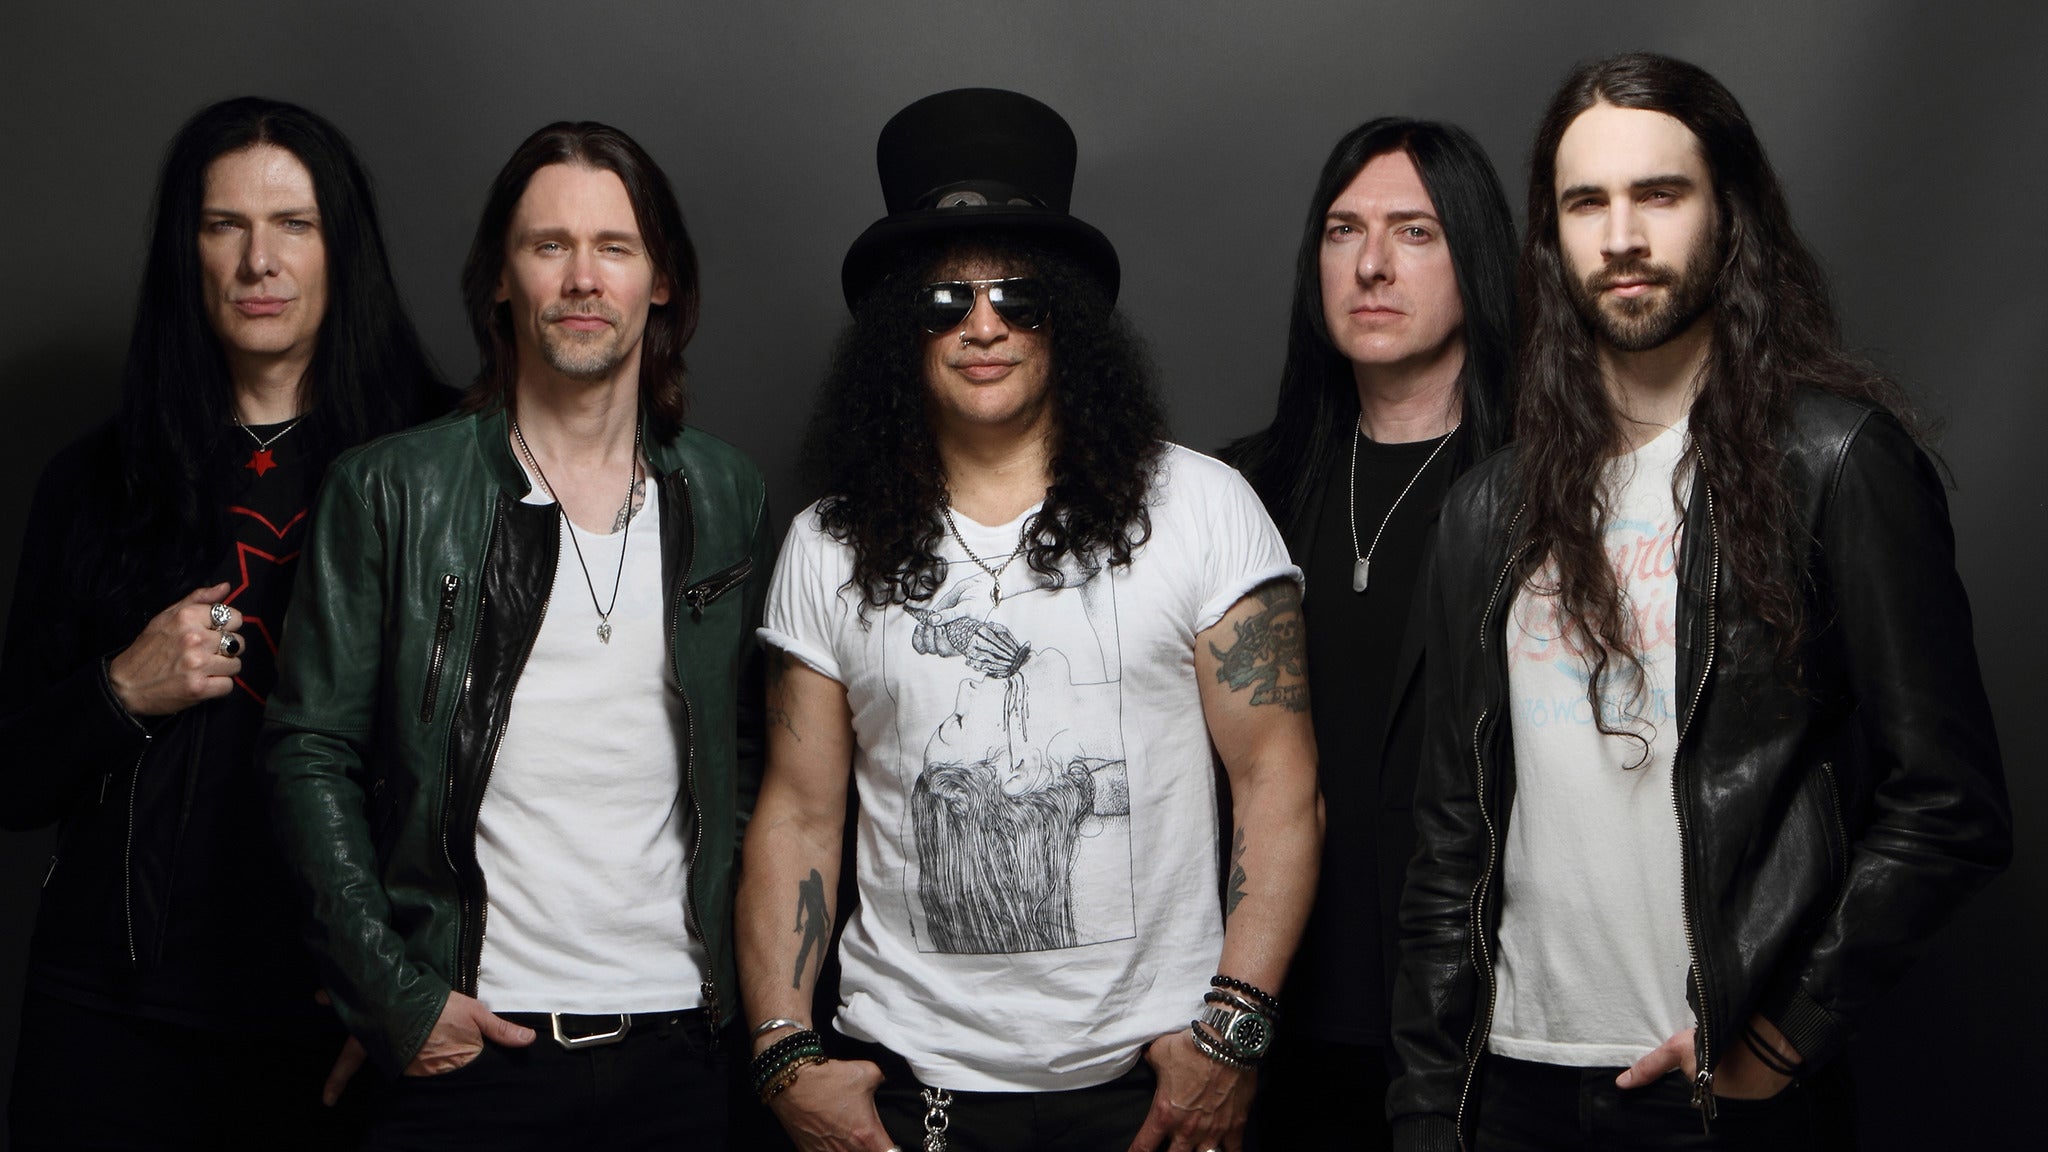 Slash Ft. Myles Kennedy & The Conspirators 2019 in Windsor promo photo for Exclusive presale offer code